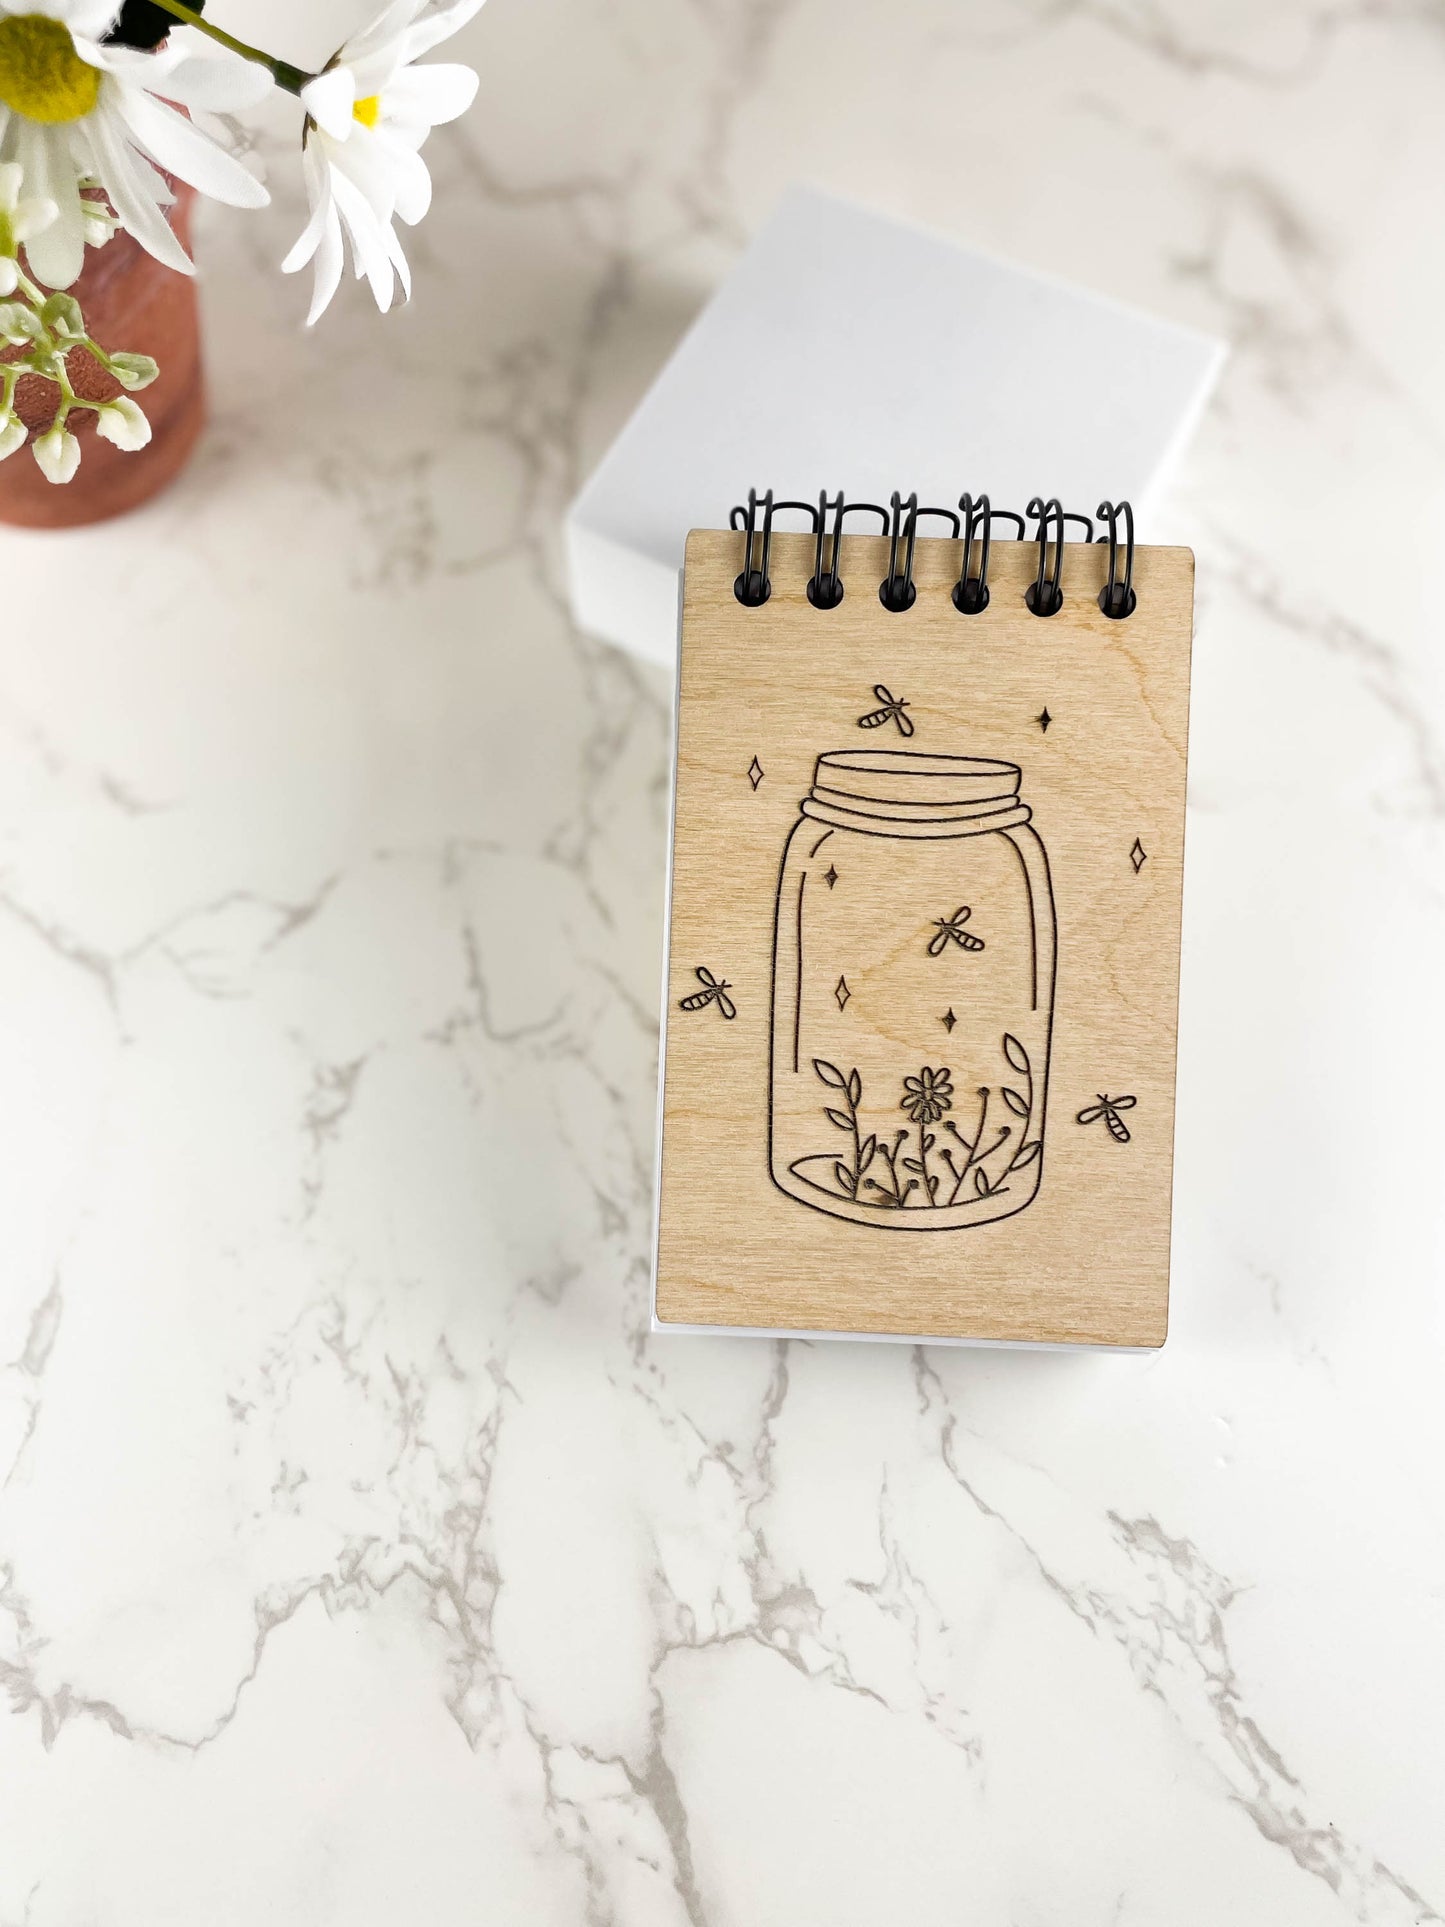 Our Handcrafted Wooden Notepad with Lightening Bugs